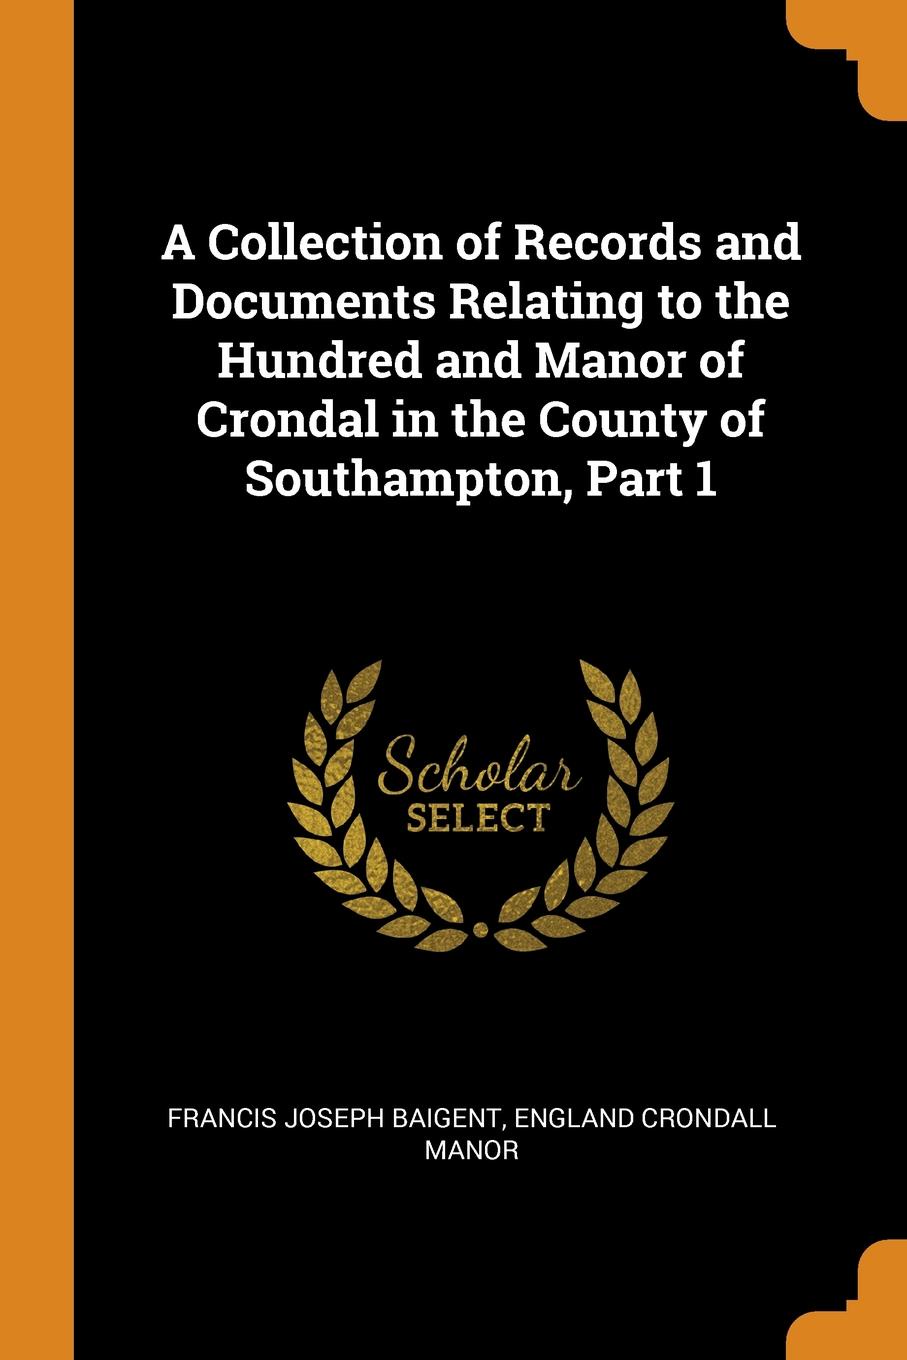 A Collection of Records and Documents Relating to the Hundred and Manor of Crondal in the County of Southampton, Part 1